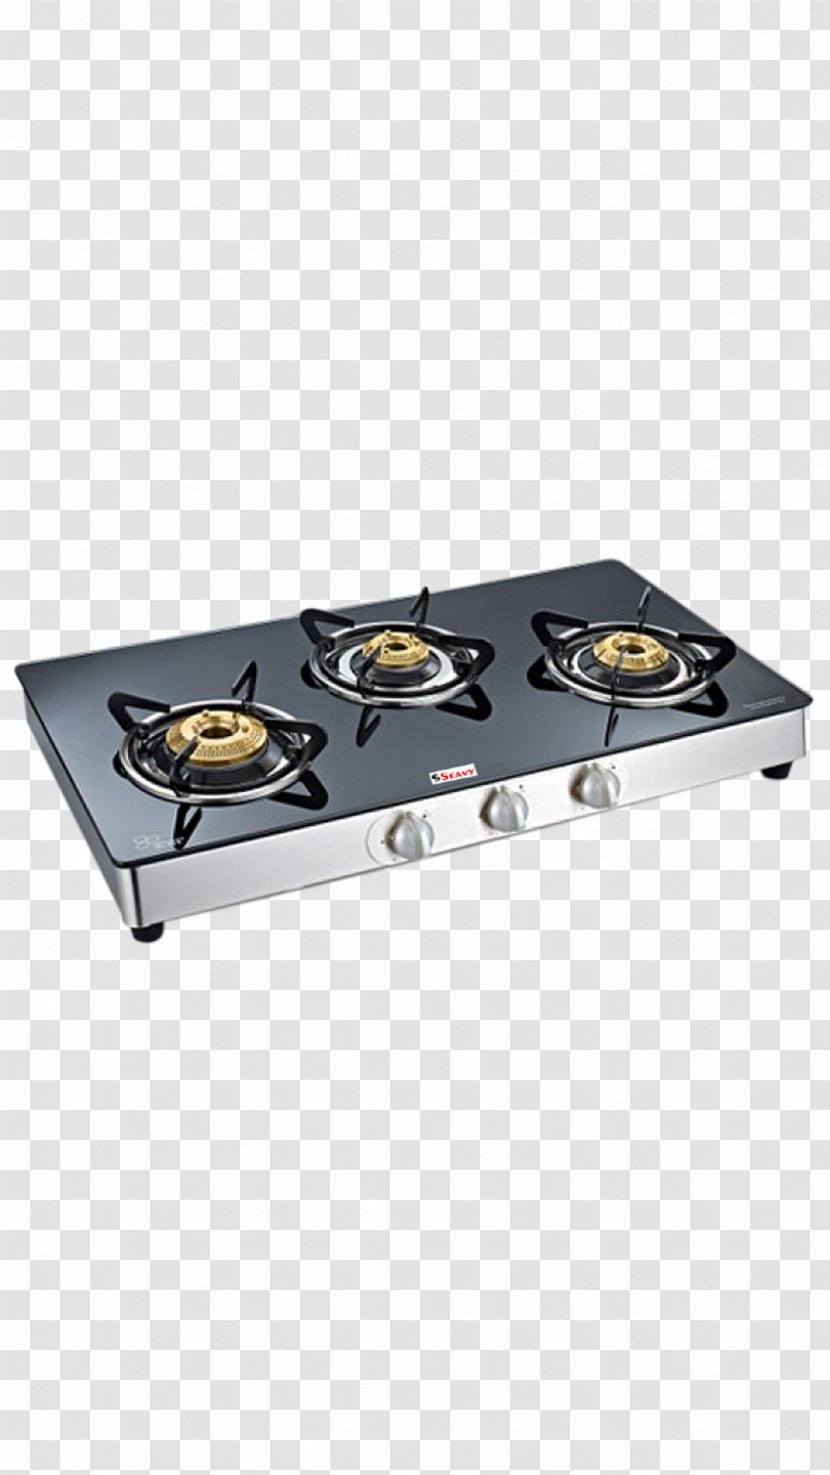 Gas Stove Cooking Ranges Home Appliance Hob Transparent PNG